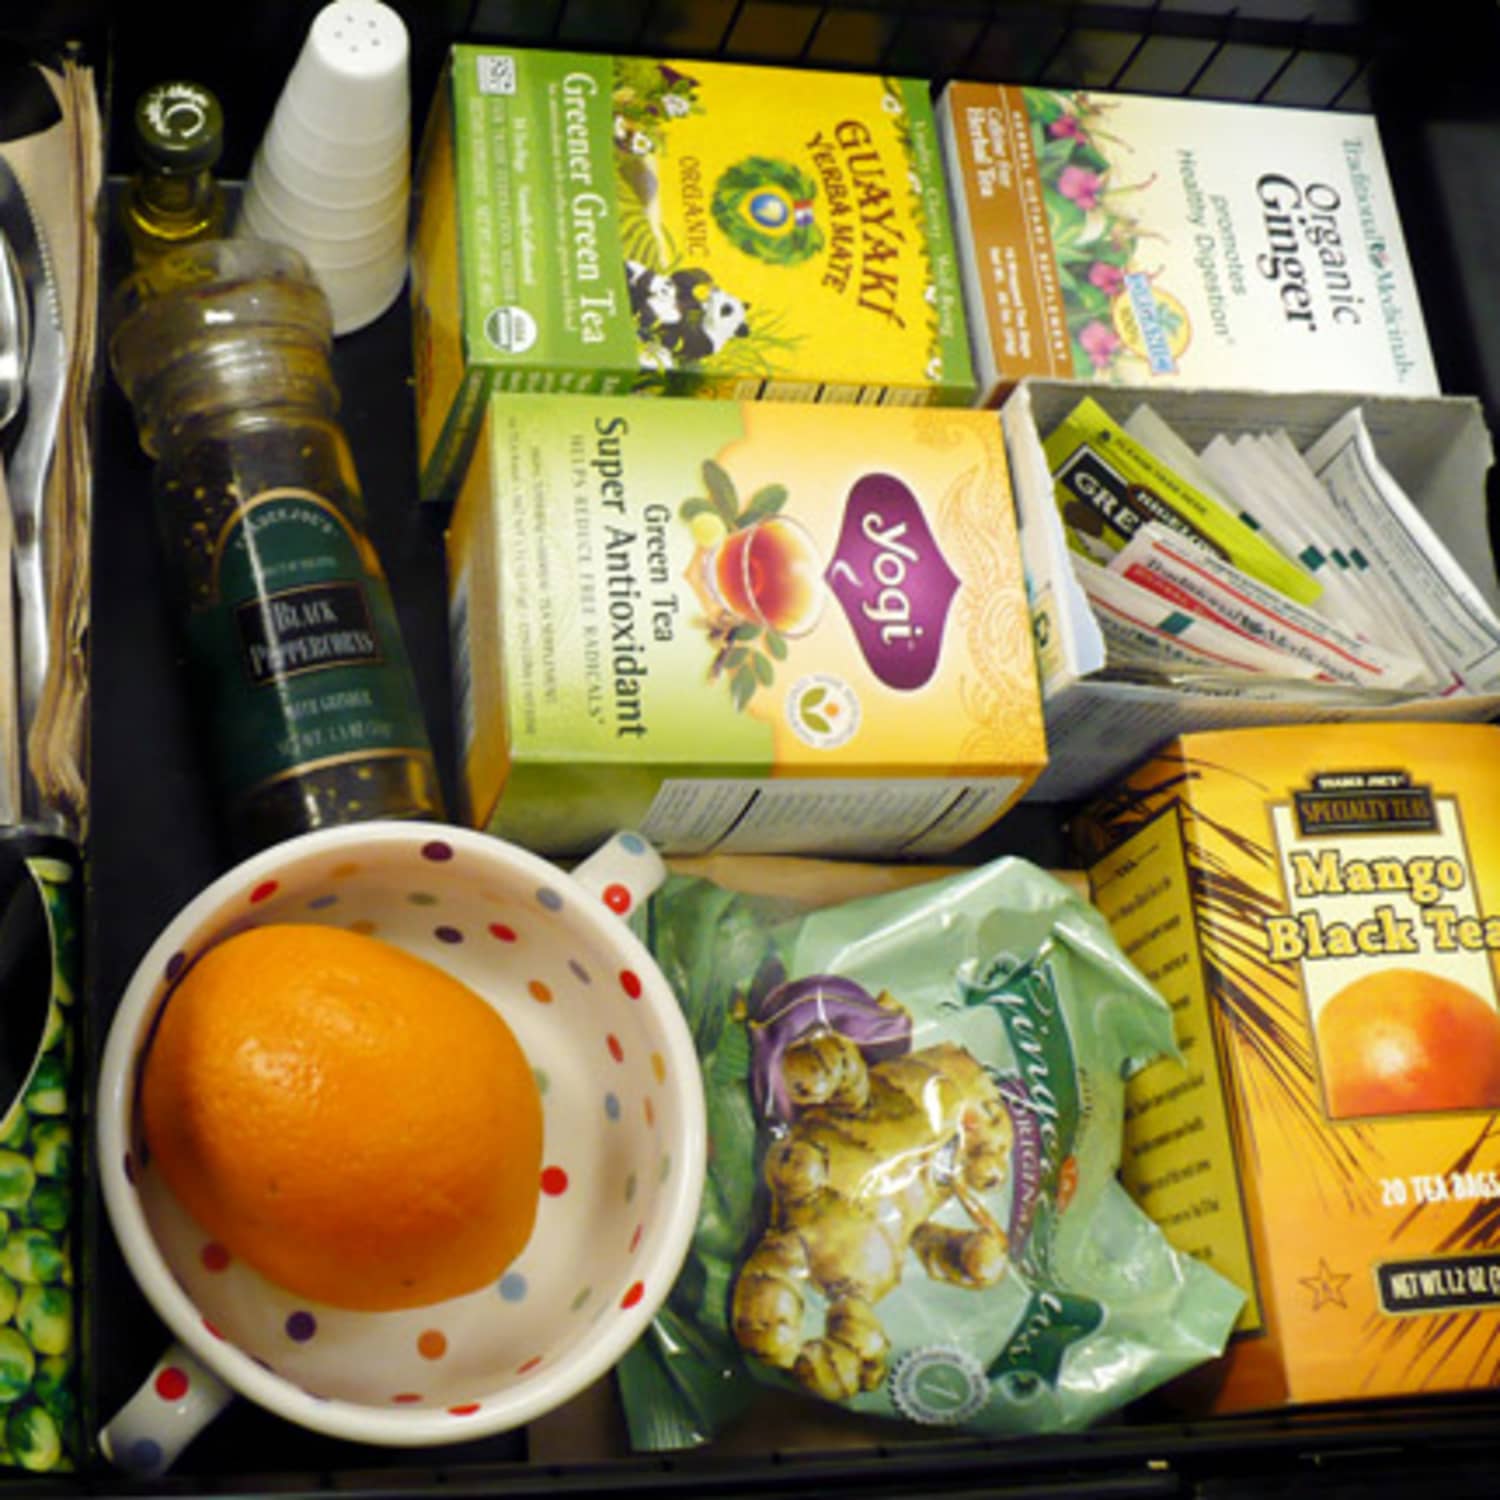 Eating at the Office: What's in Your Snack Drawer? | Kitchn